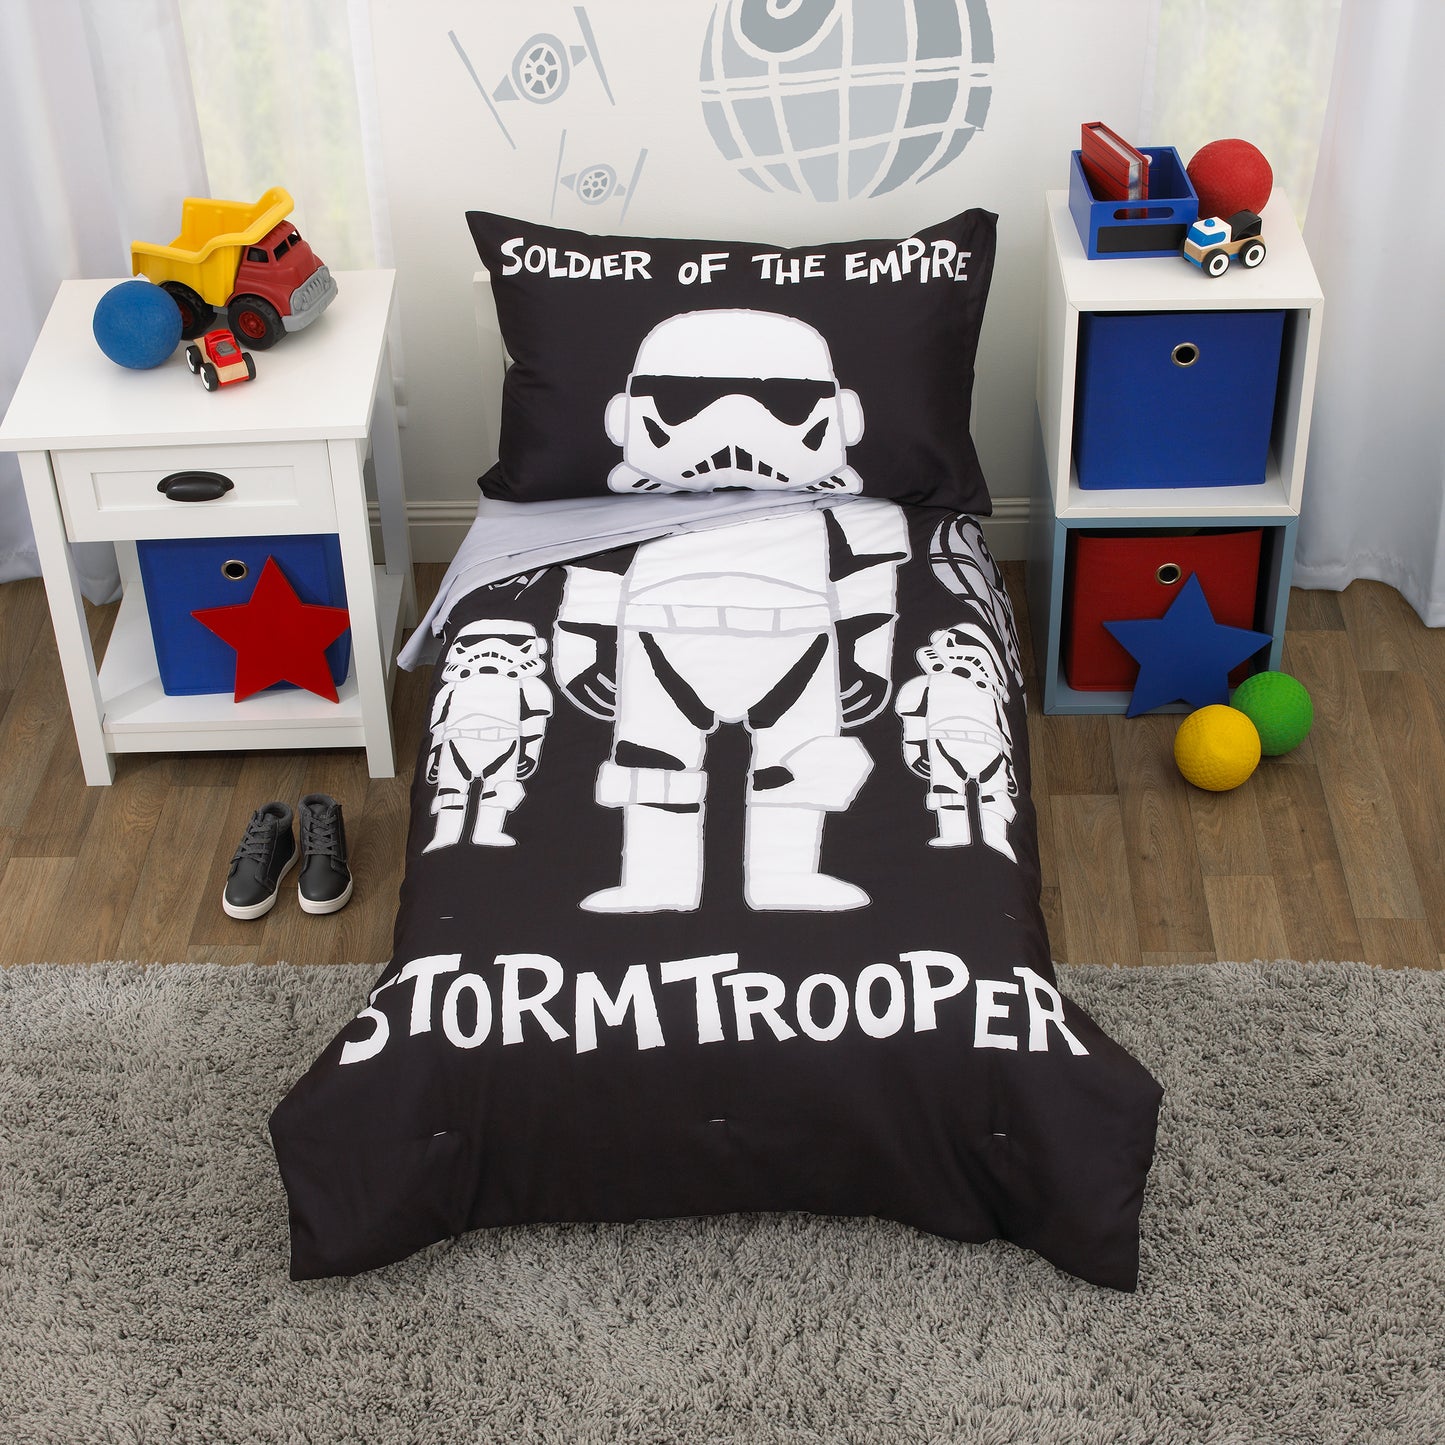 Star Wars Storm Trooper Black and White 4 Piece Toddler Bed Set - Comforter, Fitted Bottom Sheet, Flat Top Sheet, and Reversible Pillowcase